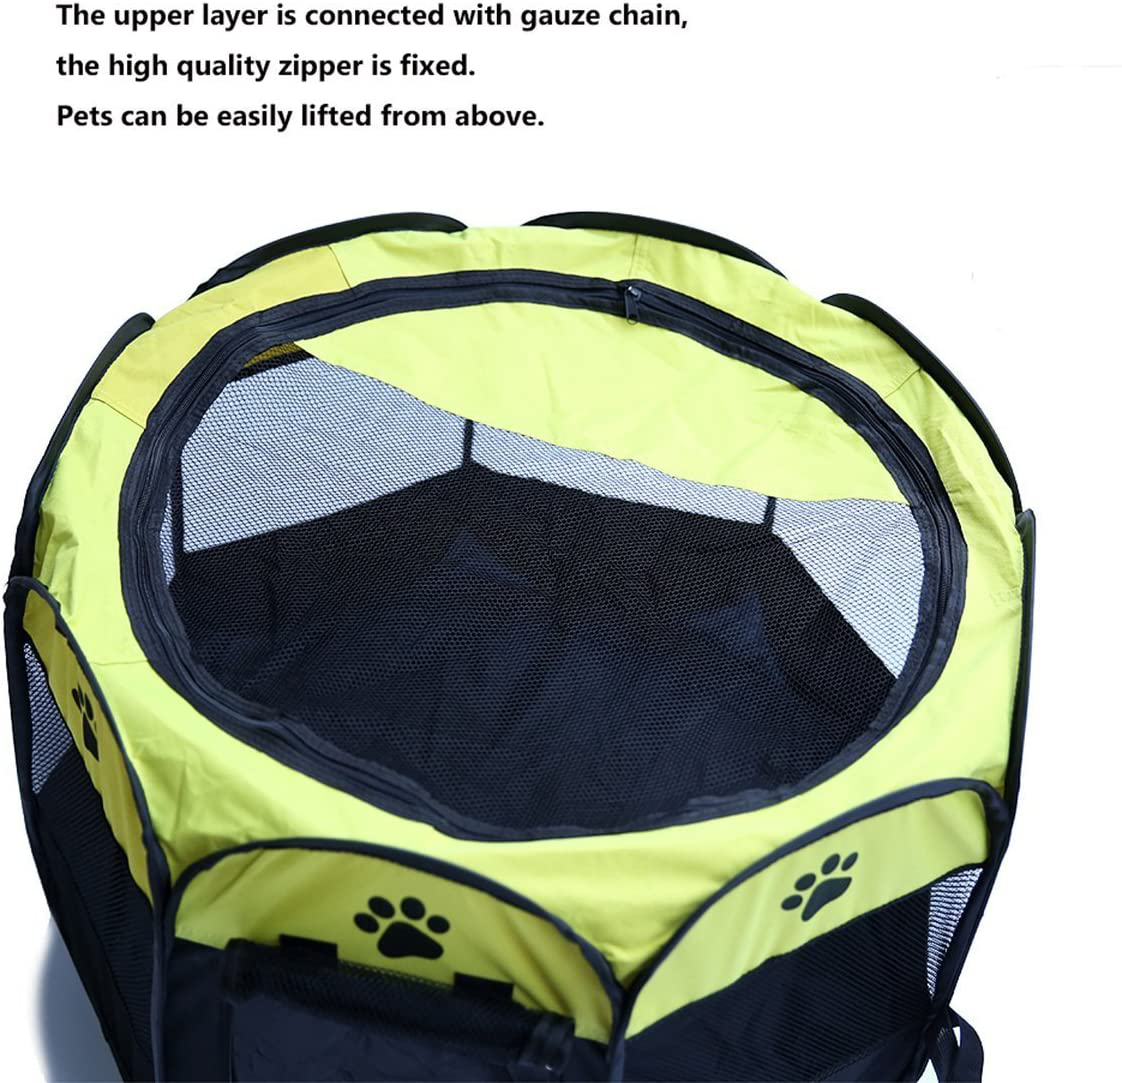 Horing Pop up Tent Pet Playpen Carrier Dog Cat Puppies Portable Foldable Durable Paw Kennel